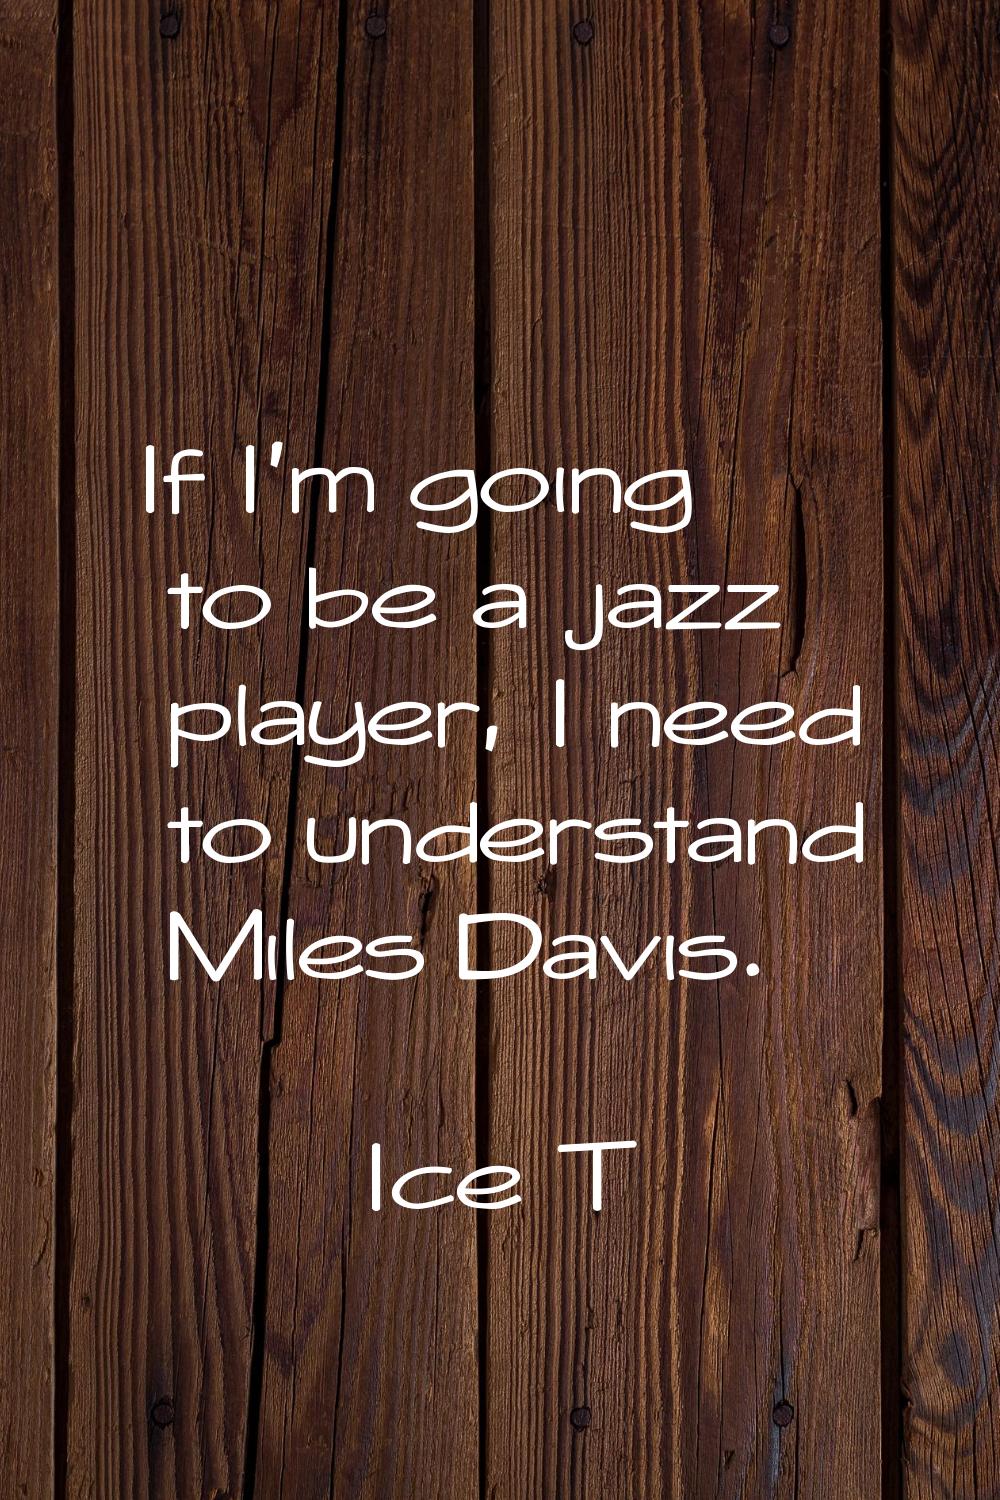 If I'm going to be a jazz player, I need to understand Miles Davis.